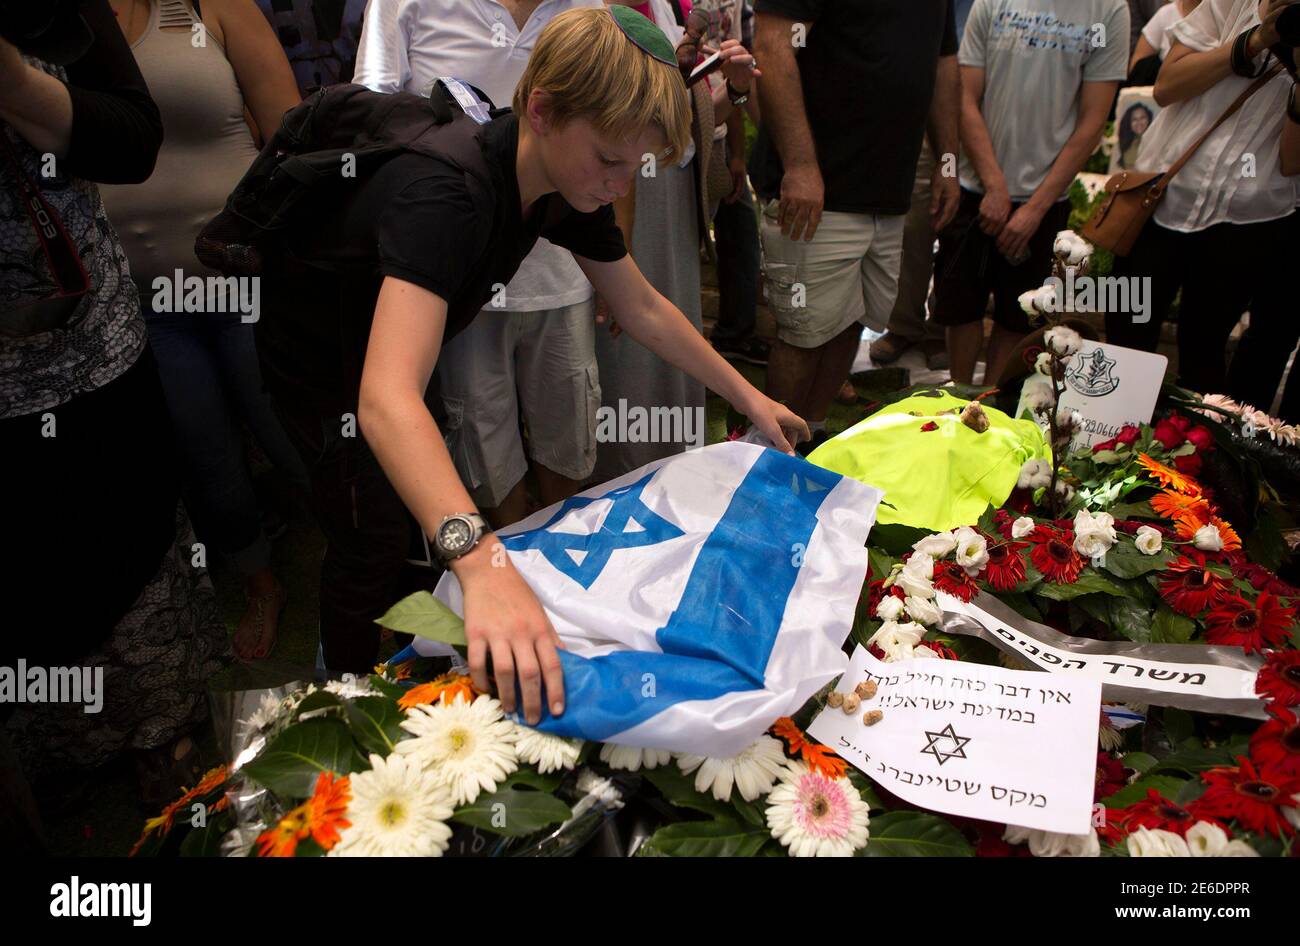 A mourner places an Israeli flag on the grave of fallen soldier Max Steinberg during his funeral at Mount Herzl military cemetery in Jerusalem July 23, 2014. Steinberg, a 23 year-old American from California's San Fernando Valley, was among 13 Israeli Defense Forces soldiers killed on Sunday during fighting in Gaza. REUTERS/Siegfried Modola (JERUSALEM - Tags: CONFLICT POLITICS CIVIL UNREST MILITARY) Stock Photo